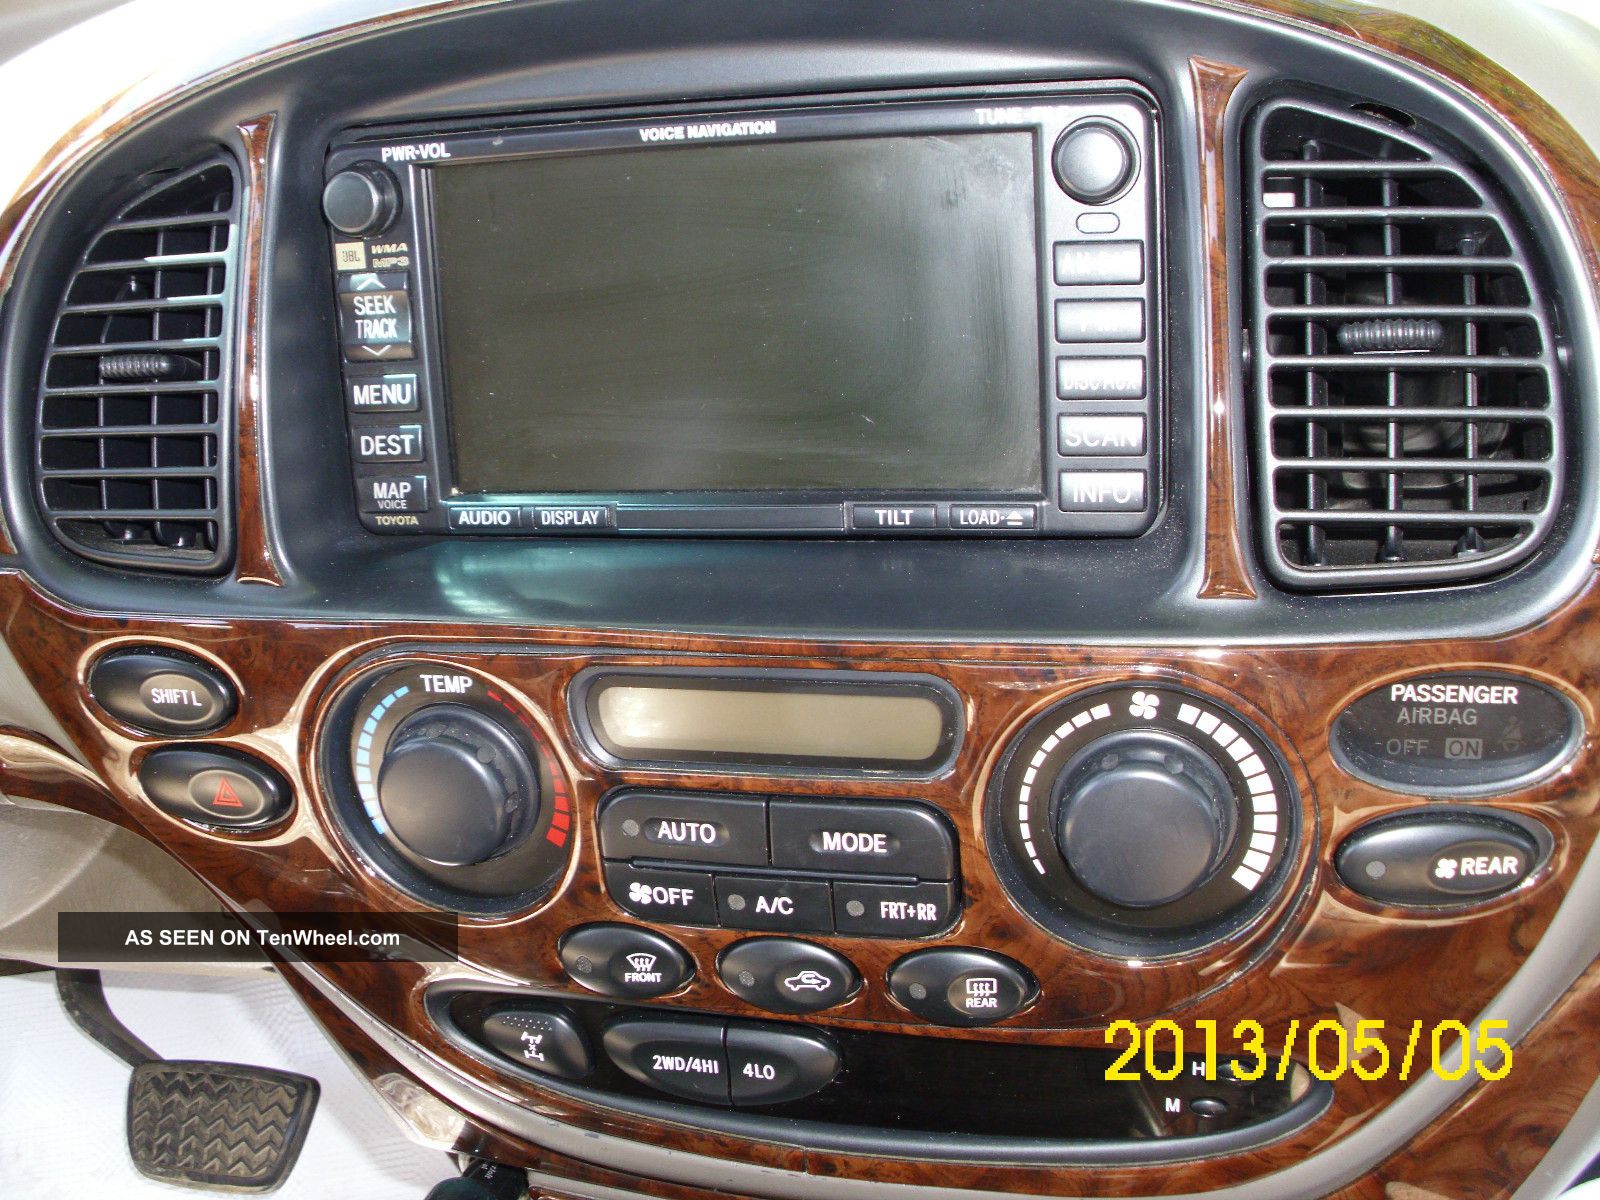 Dvd player for 2005 toyota sequoia